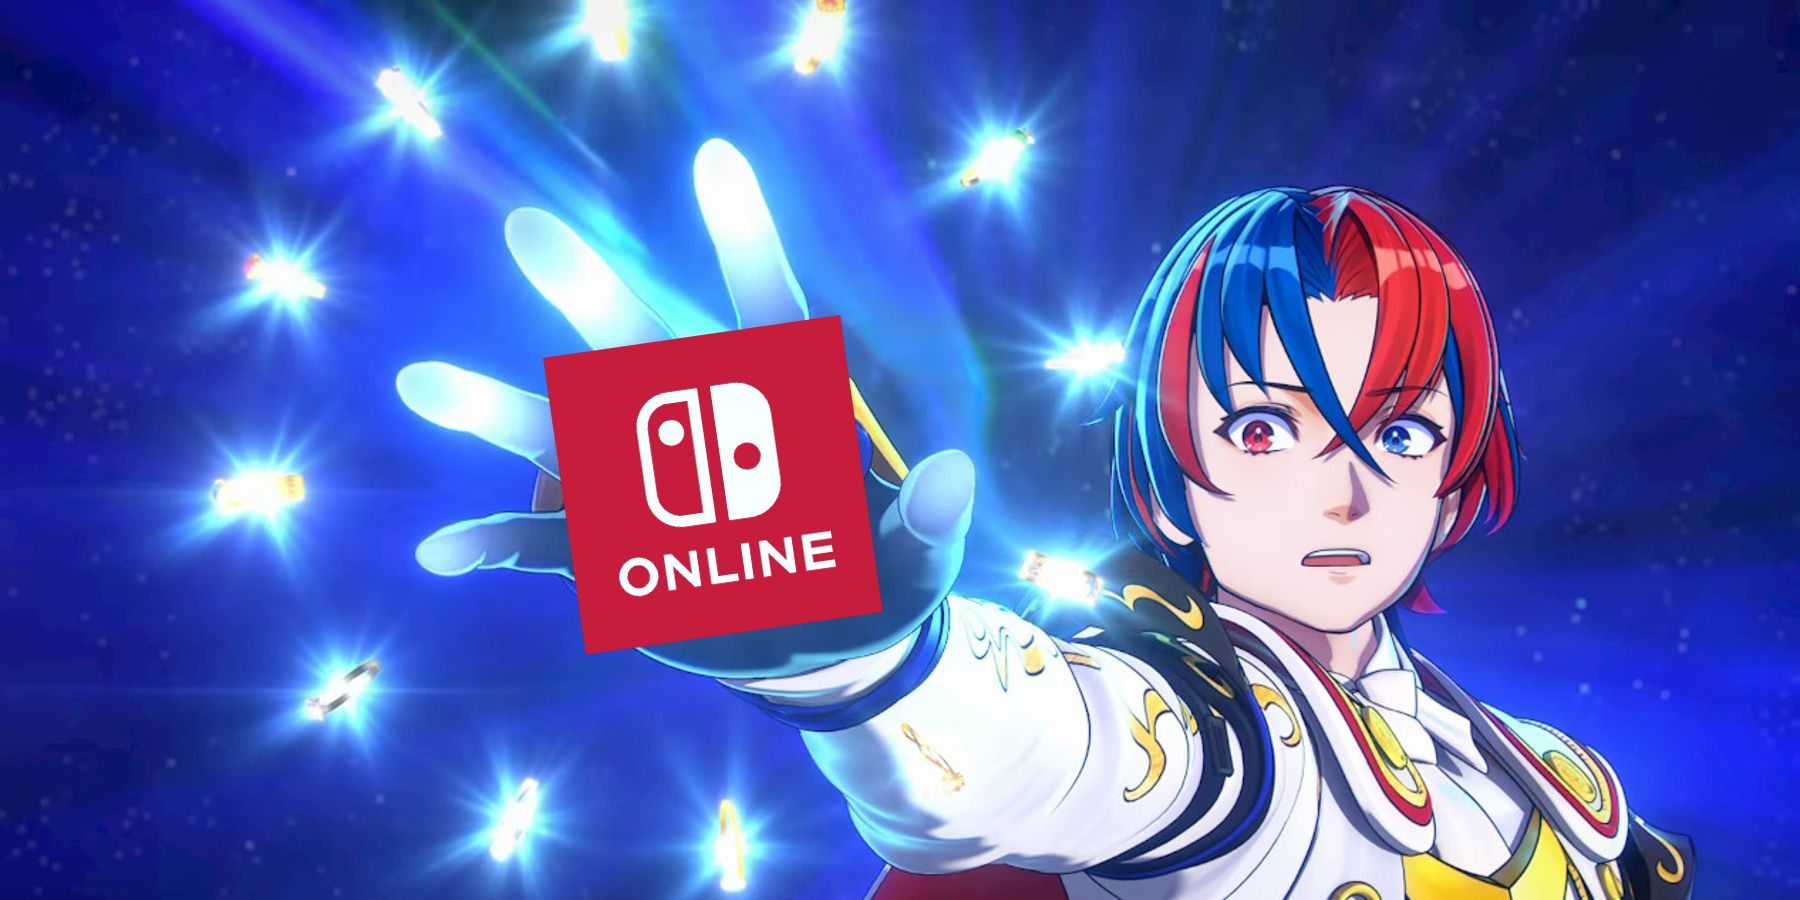 Nintendo Expands Switch Online's GBA Library With Fire Emblem